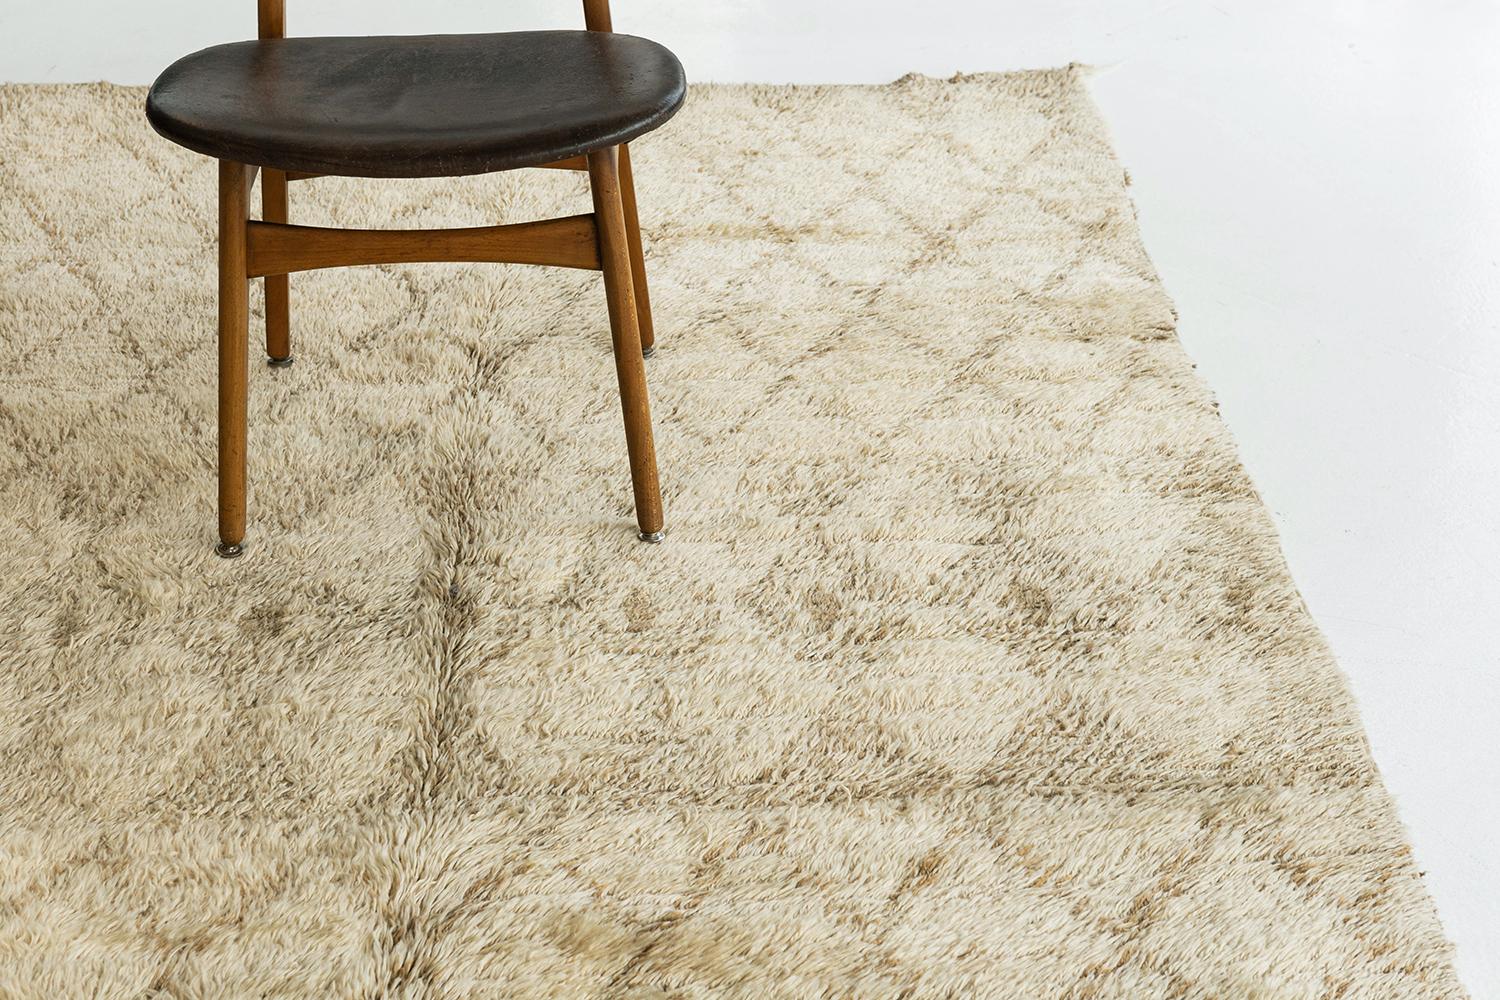 A beautiful vintage Moroccan from the Beni Ourain tribe. This charming handwoven wool piece has the perfect sandy ivory color and contains traditional diamond motifs latticed throughout the field in a golden hue. A one of a kind rug that will leave